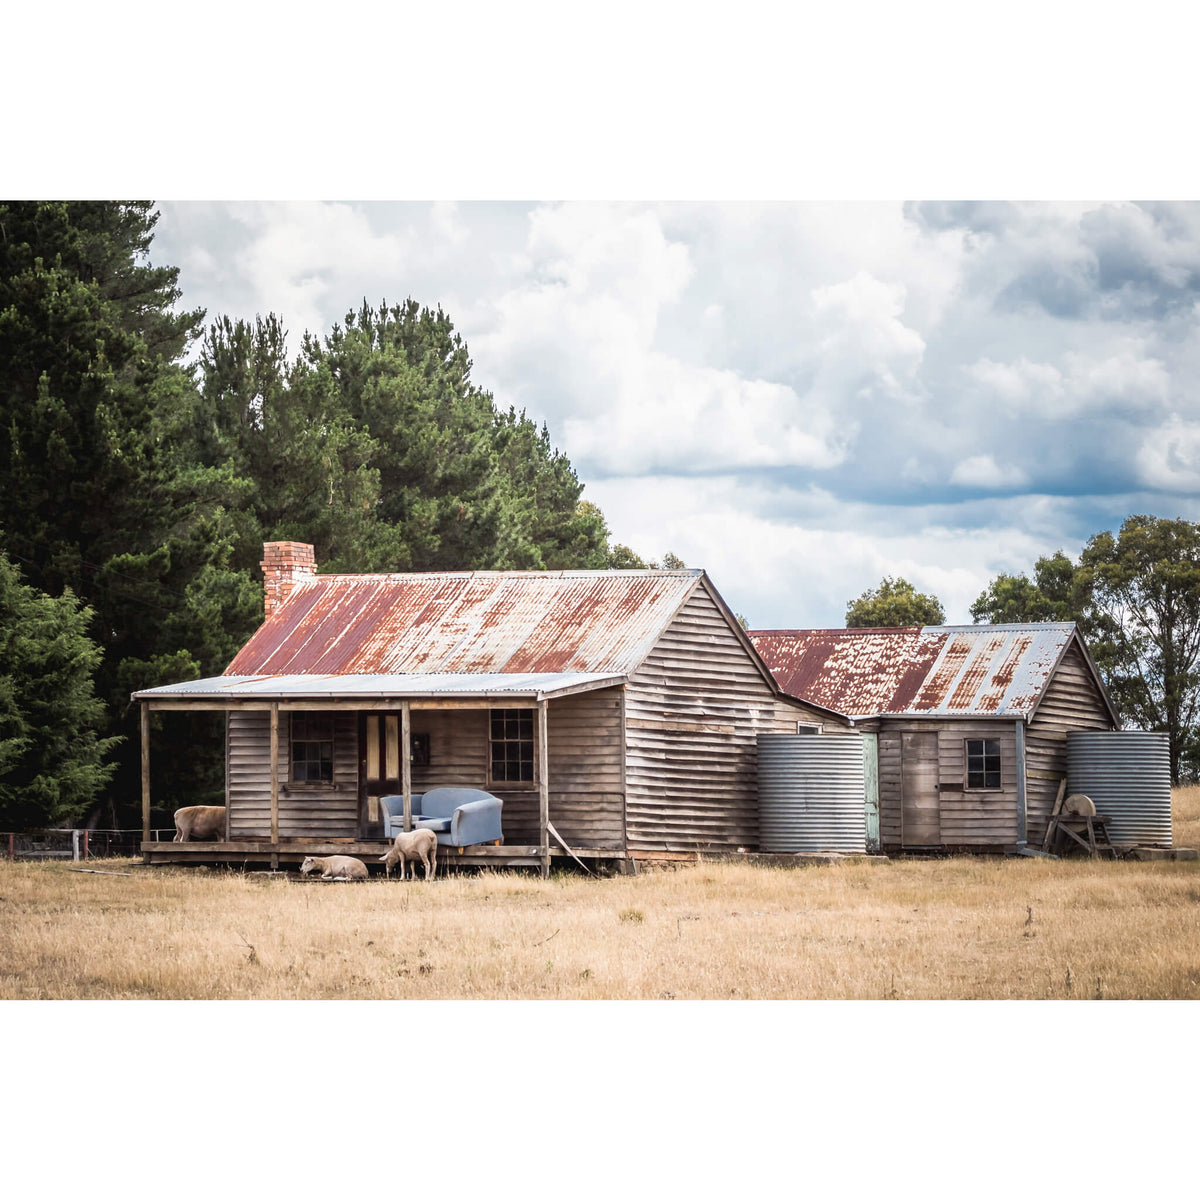 Sheep By The Porch | A Place to Call Home Fine Art Print - Lost Collective Shop